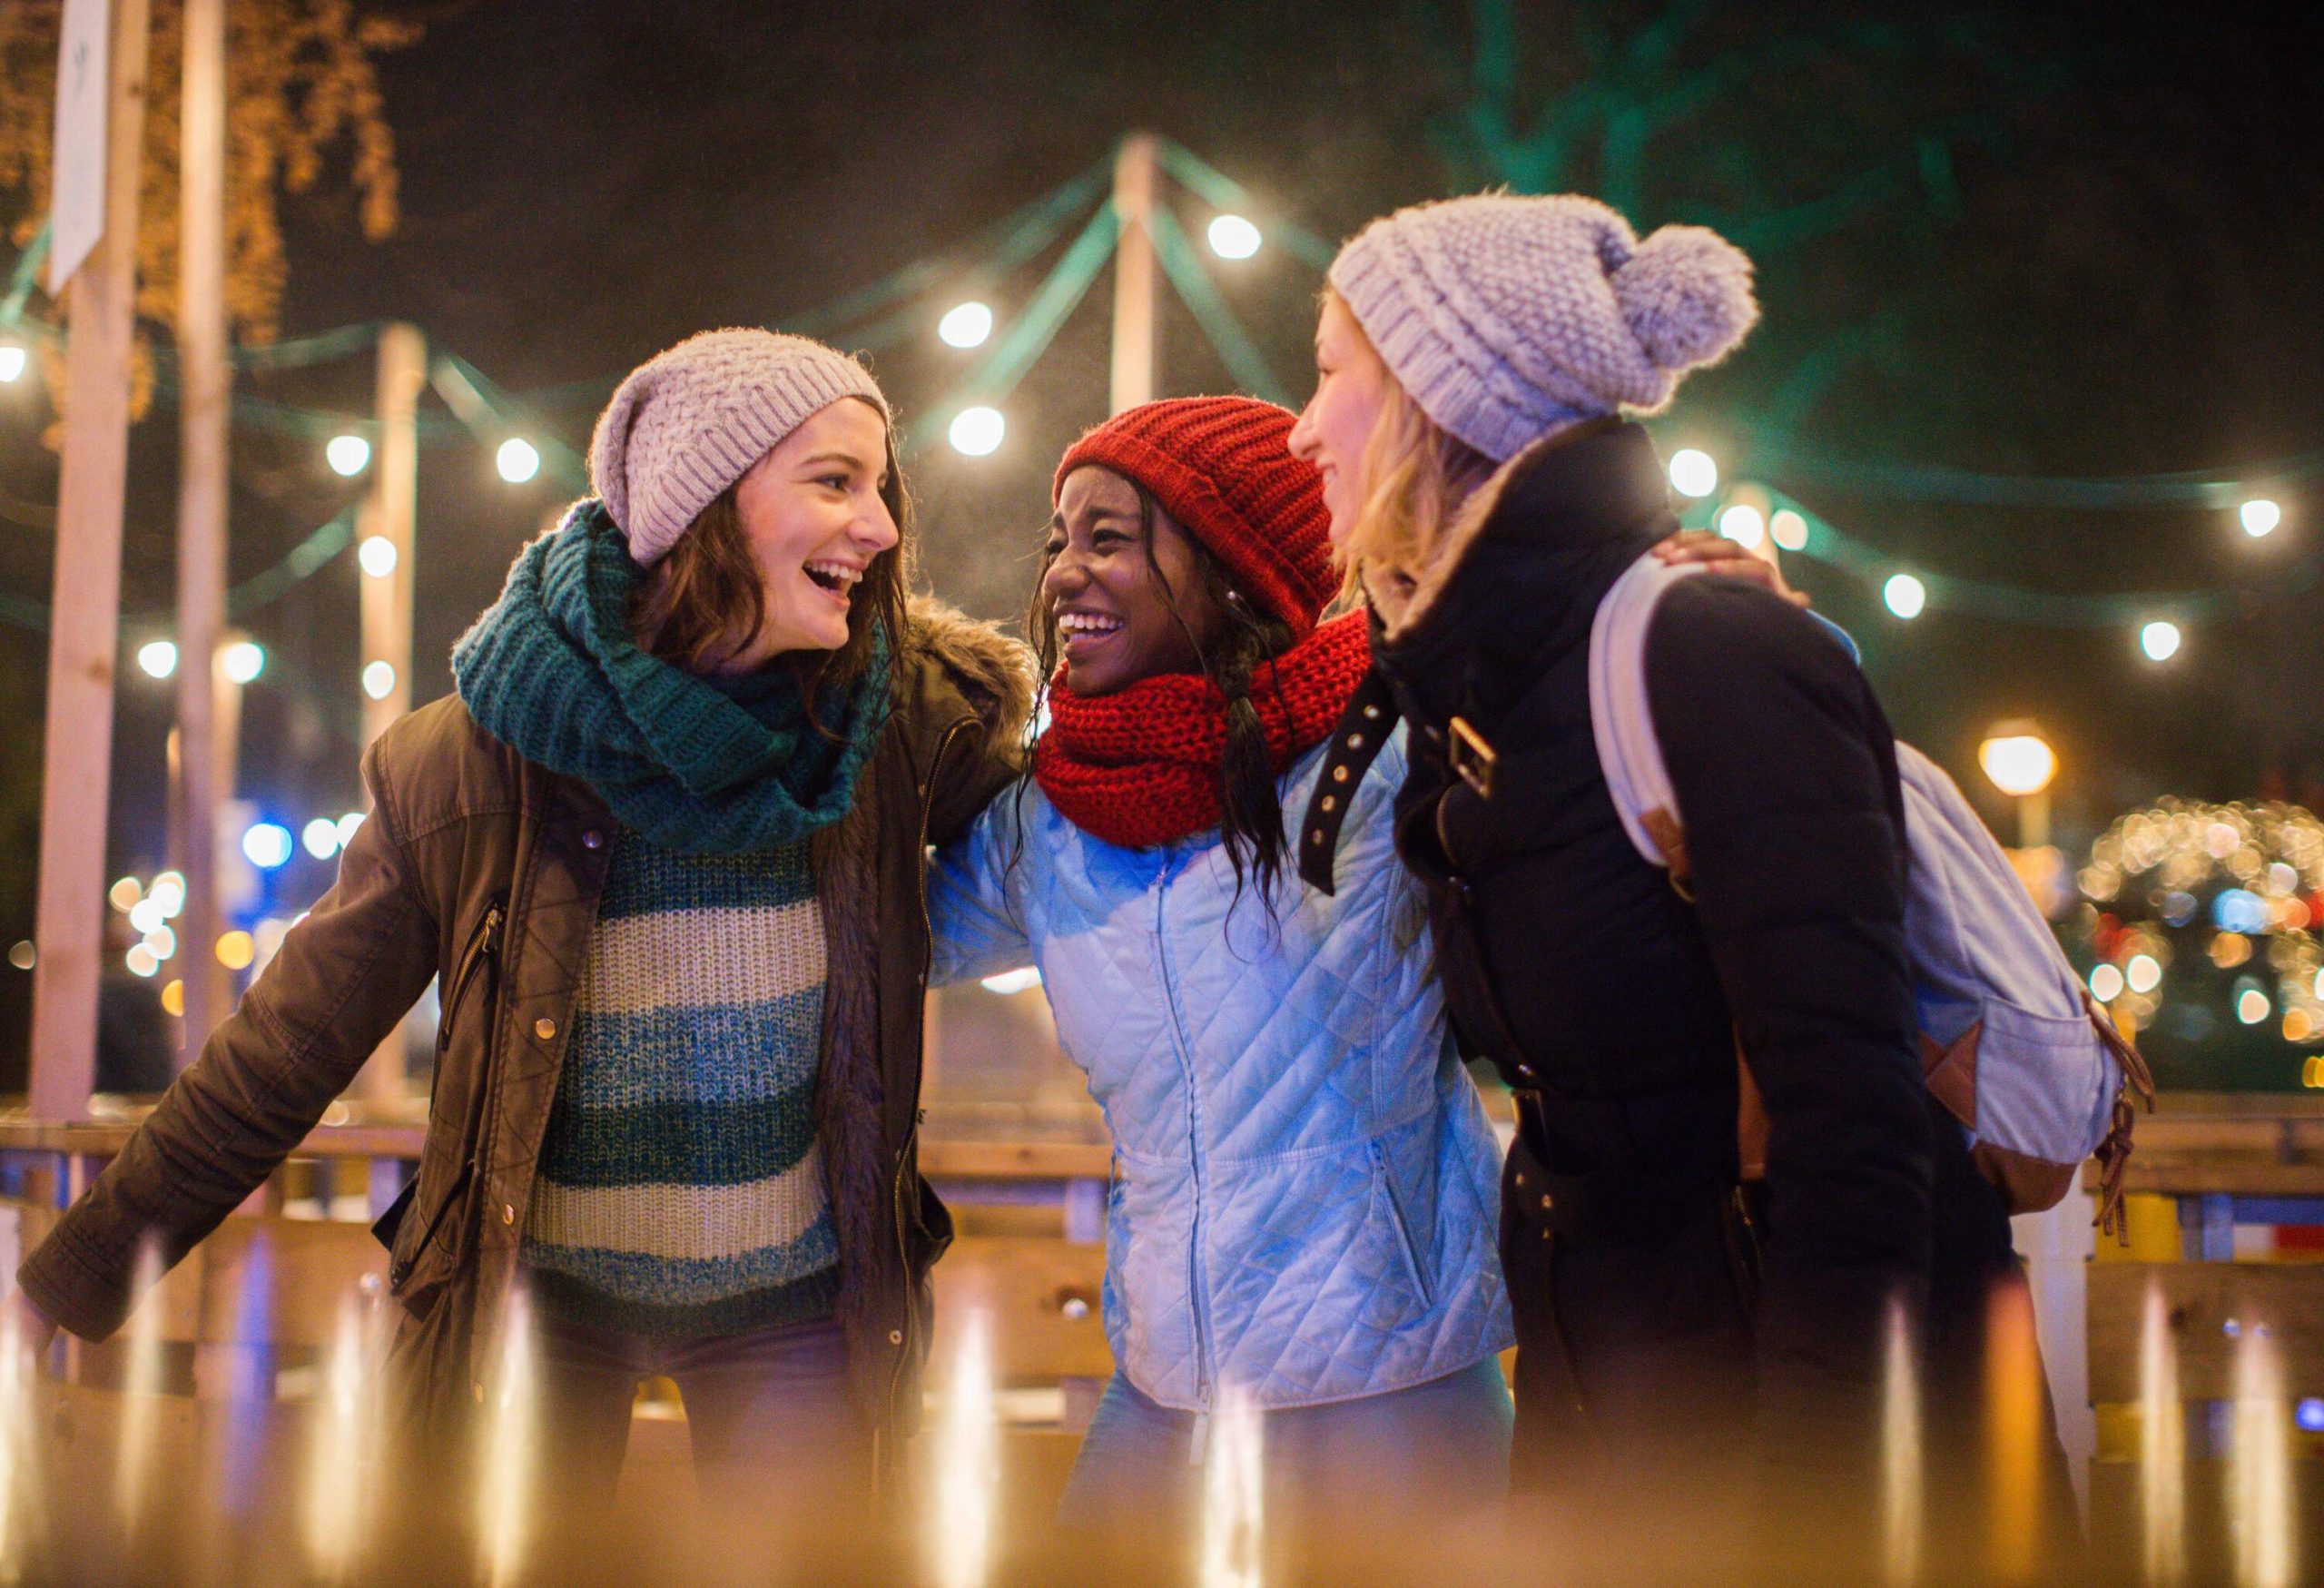 Three people wearing winter clothes having fun in the Christmas market.